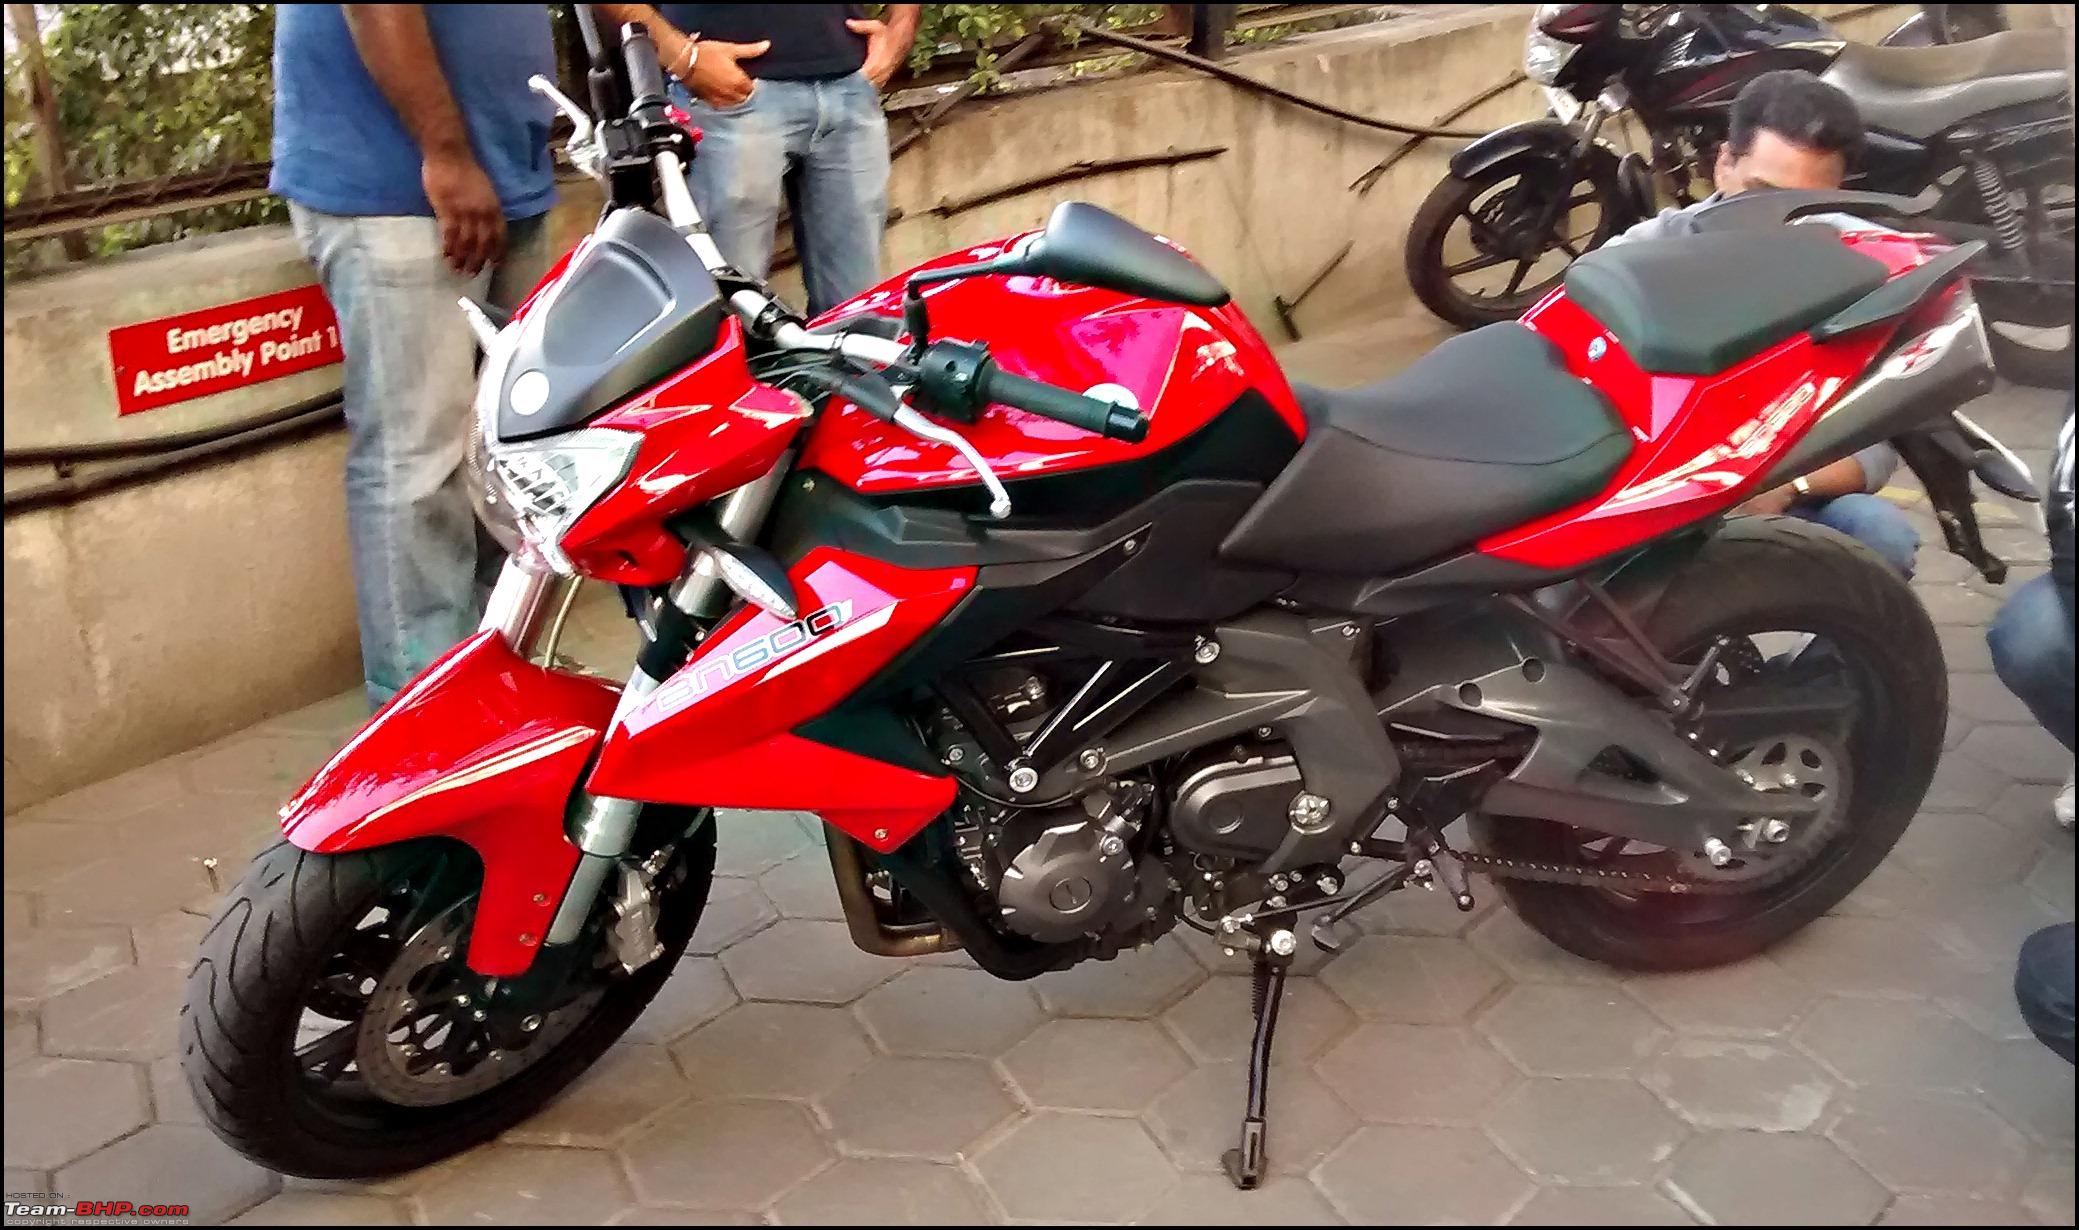 The Italian superbikes get a new address as DSK Benelli 